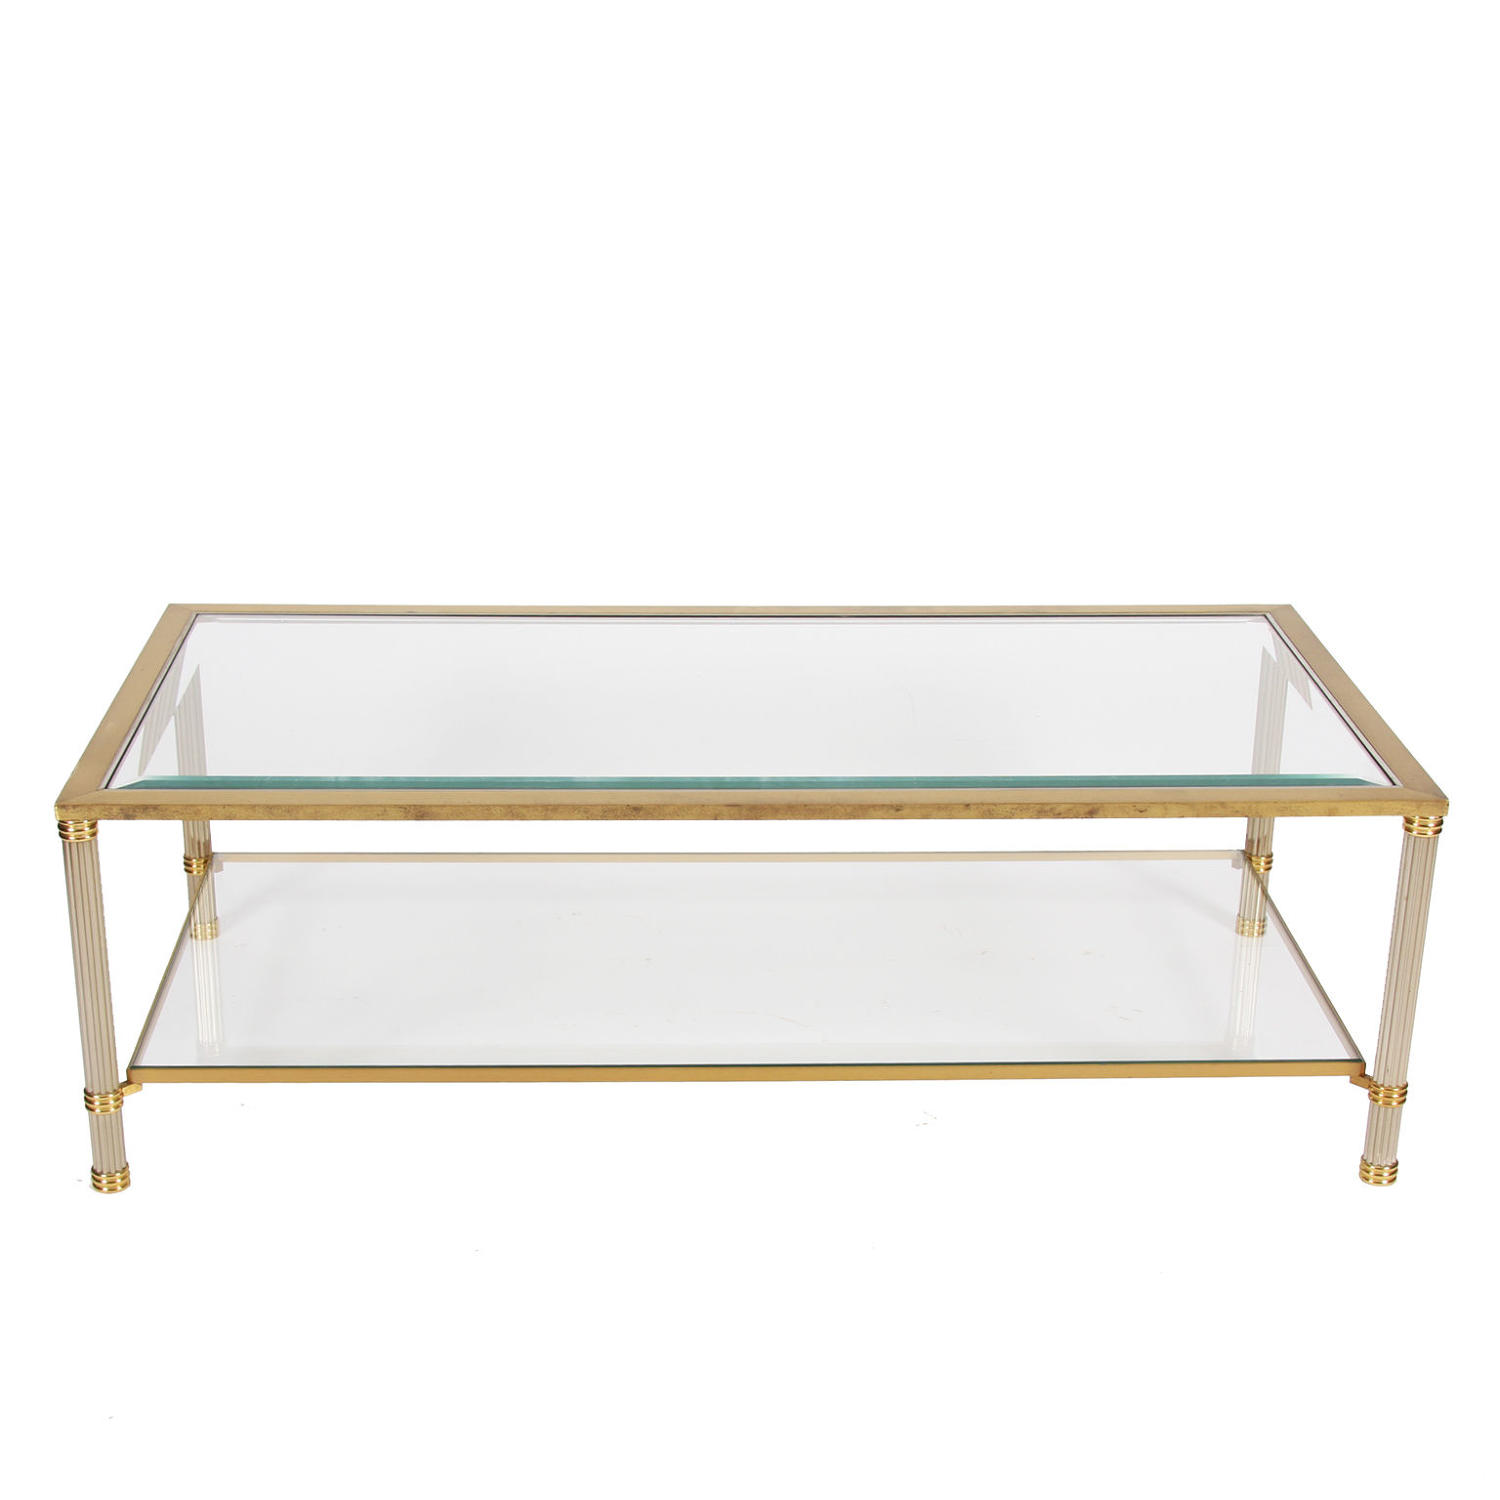 Two Tier Brass & Glass Coffee Table